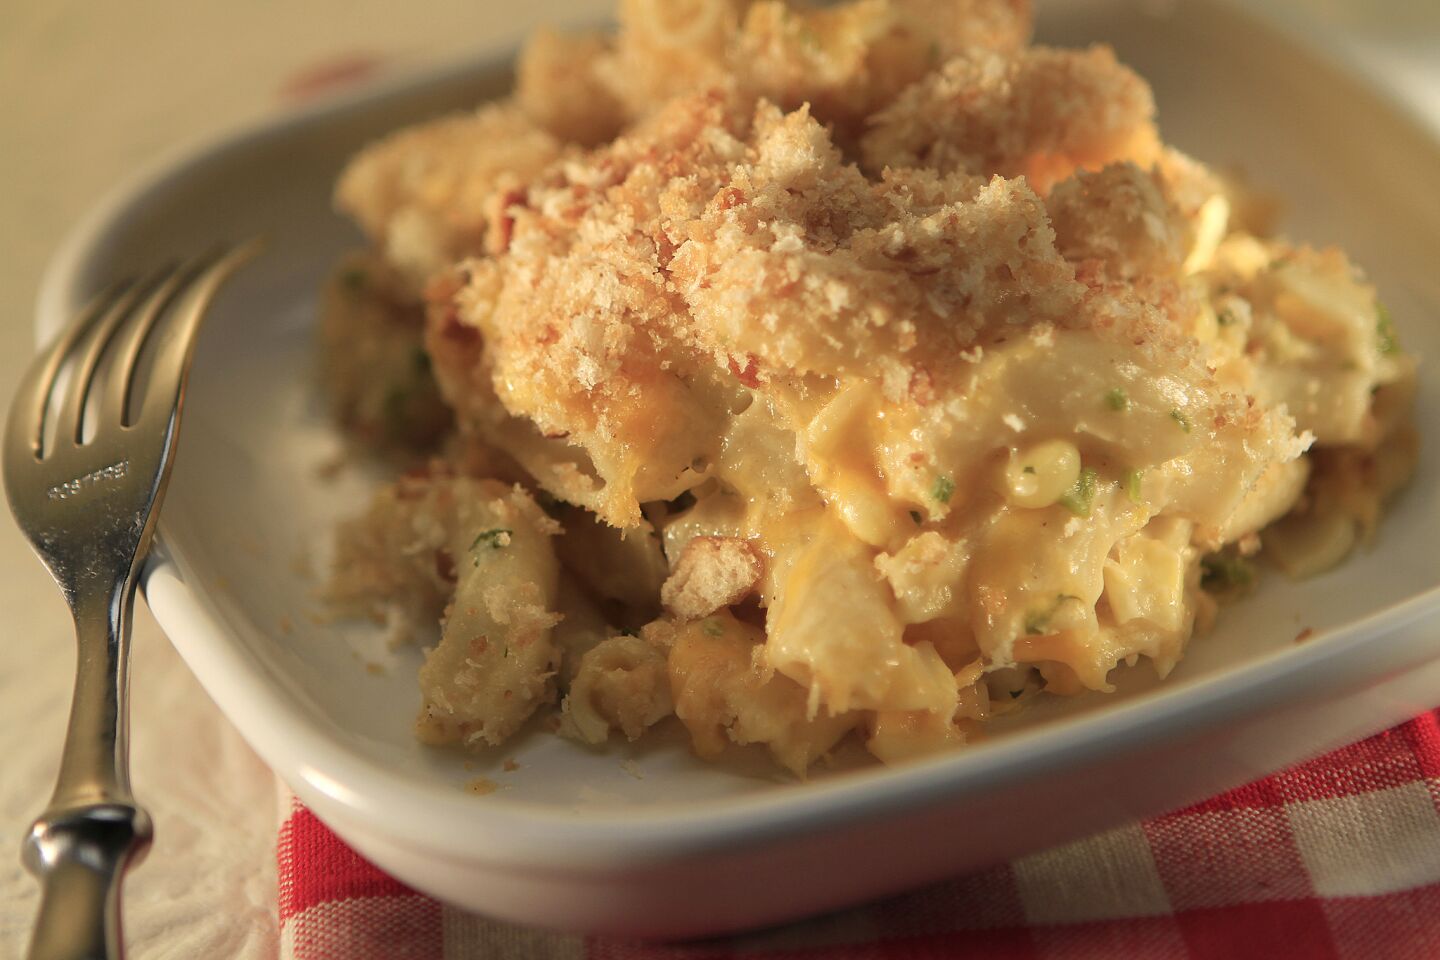 Add extra flavor with a touch of barbecue sauce, corn niblets and fresh parsley. Recipe: Famous Dave's mac 'n' cheese